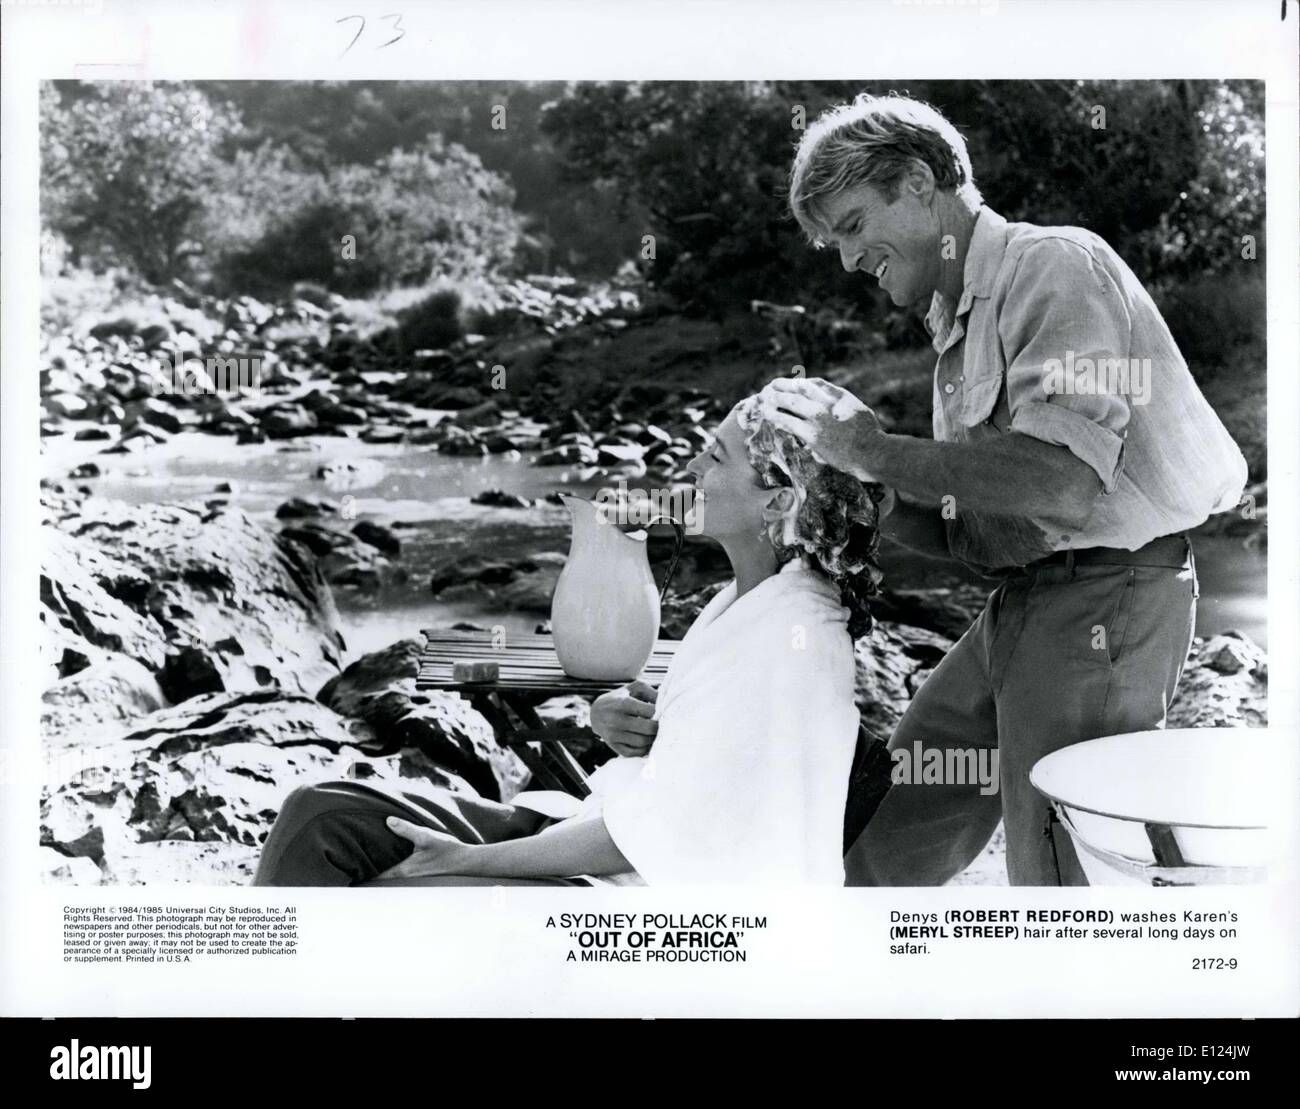 Dec. 19, 1985 - A Sydney Pollack Film ''Out Of Africa'' A Mirage Production. Denys (Robert Redford) washes Karen's (Meryl Streep) hair after several long days on safari. Stock Photo